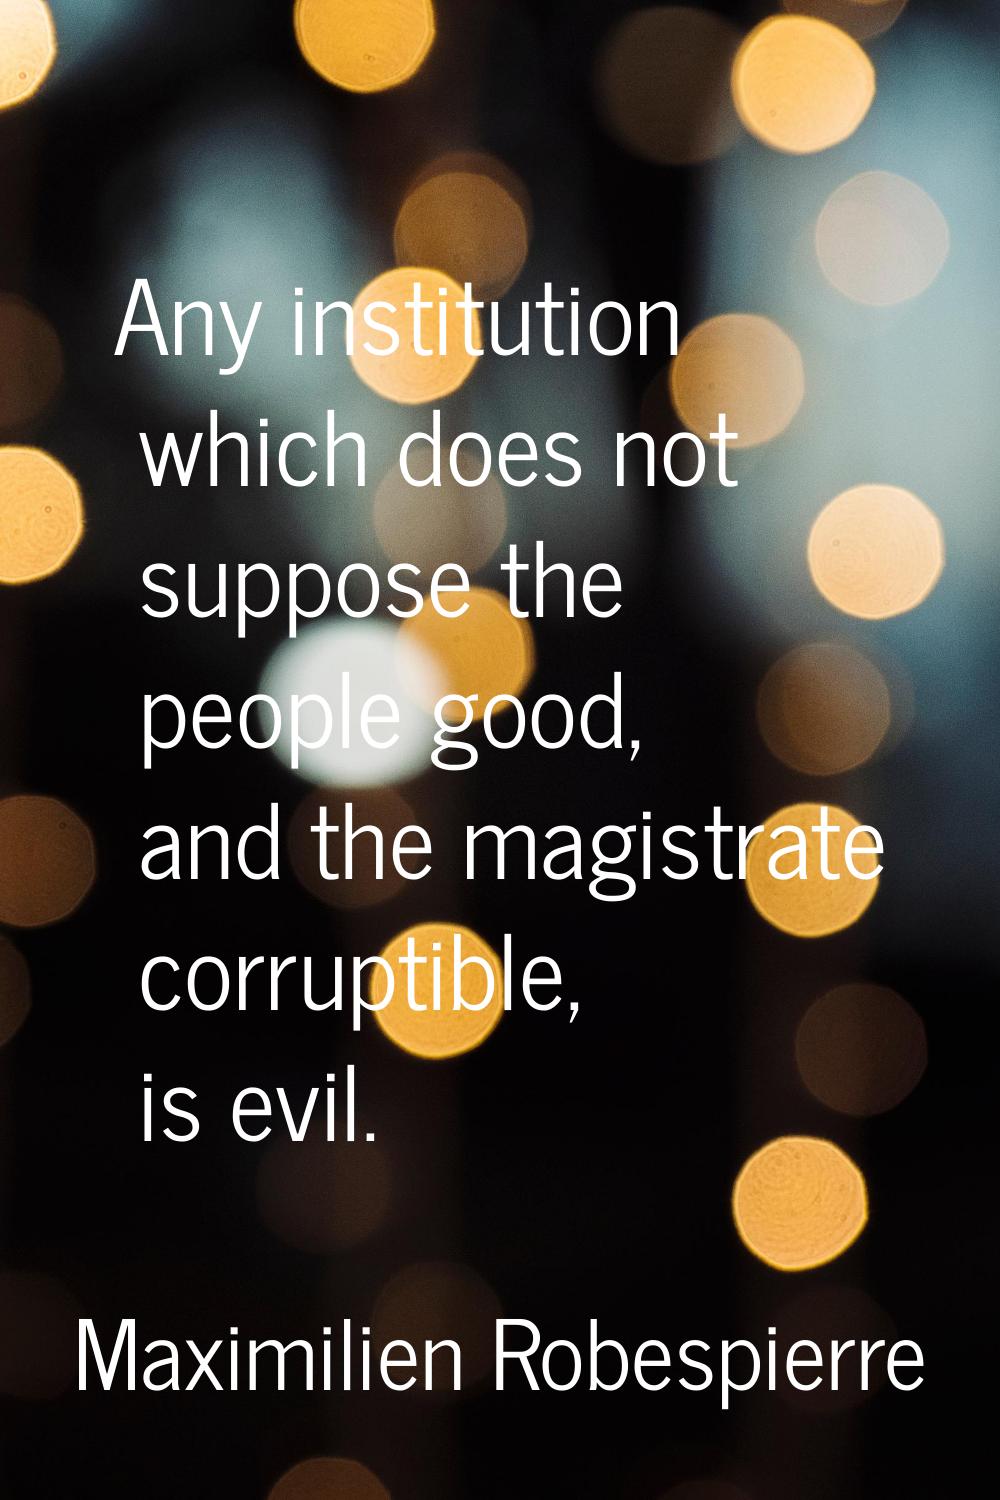 Any institution which does not suppose the people good, and the magistrate corruptible, is evil.